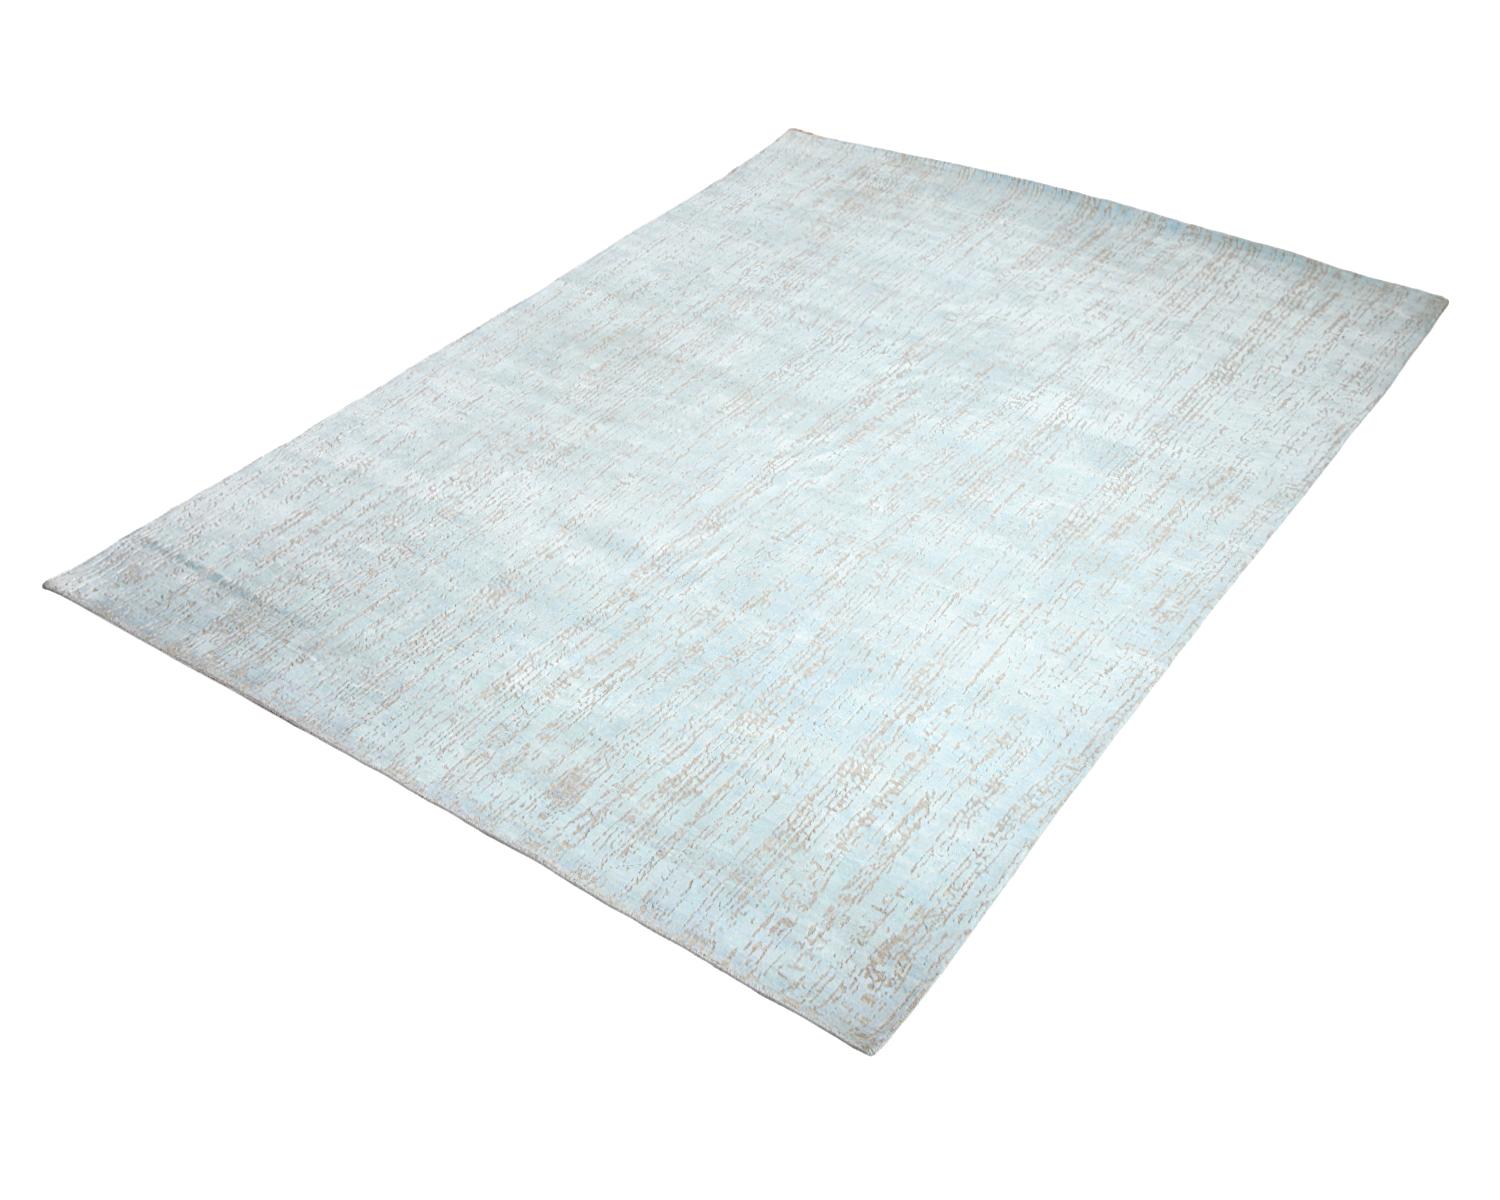 One-of-a-Kind Modern Wool Viscose Blend Hand-Knotted Area Rug, Blue, 7'11 x 10'1 3